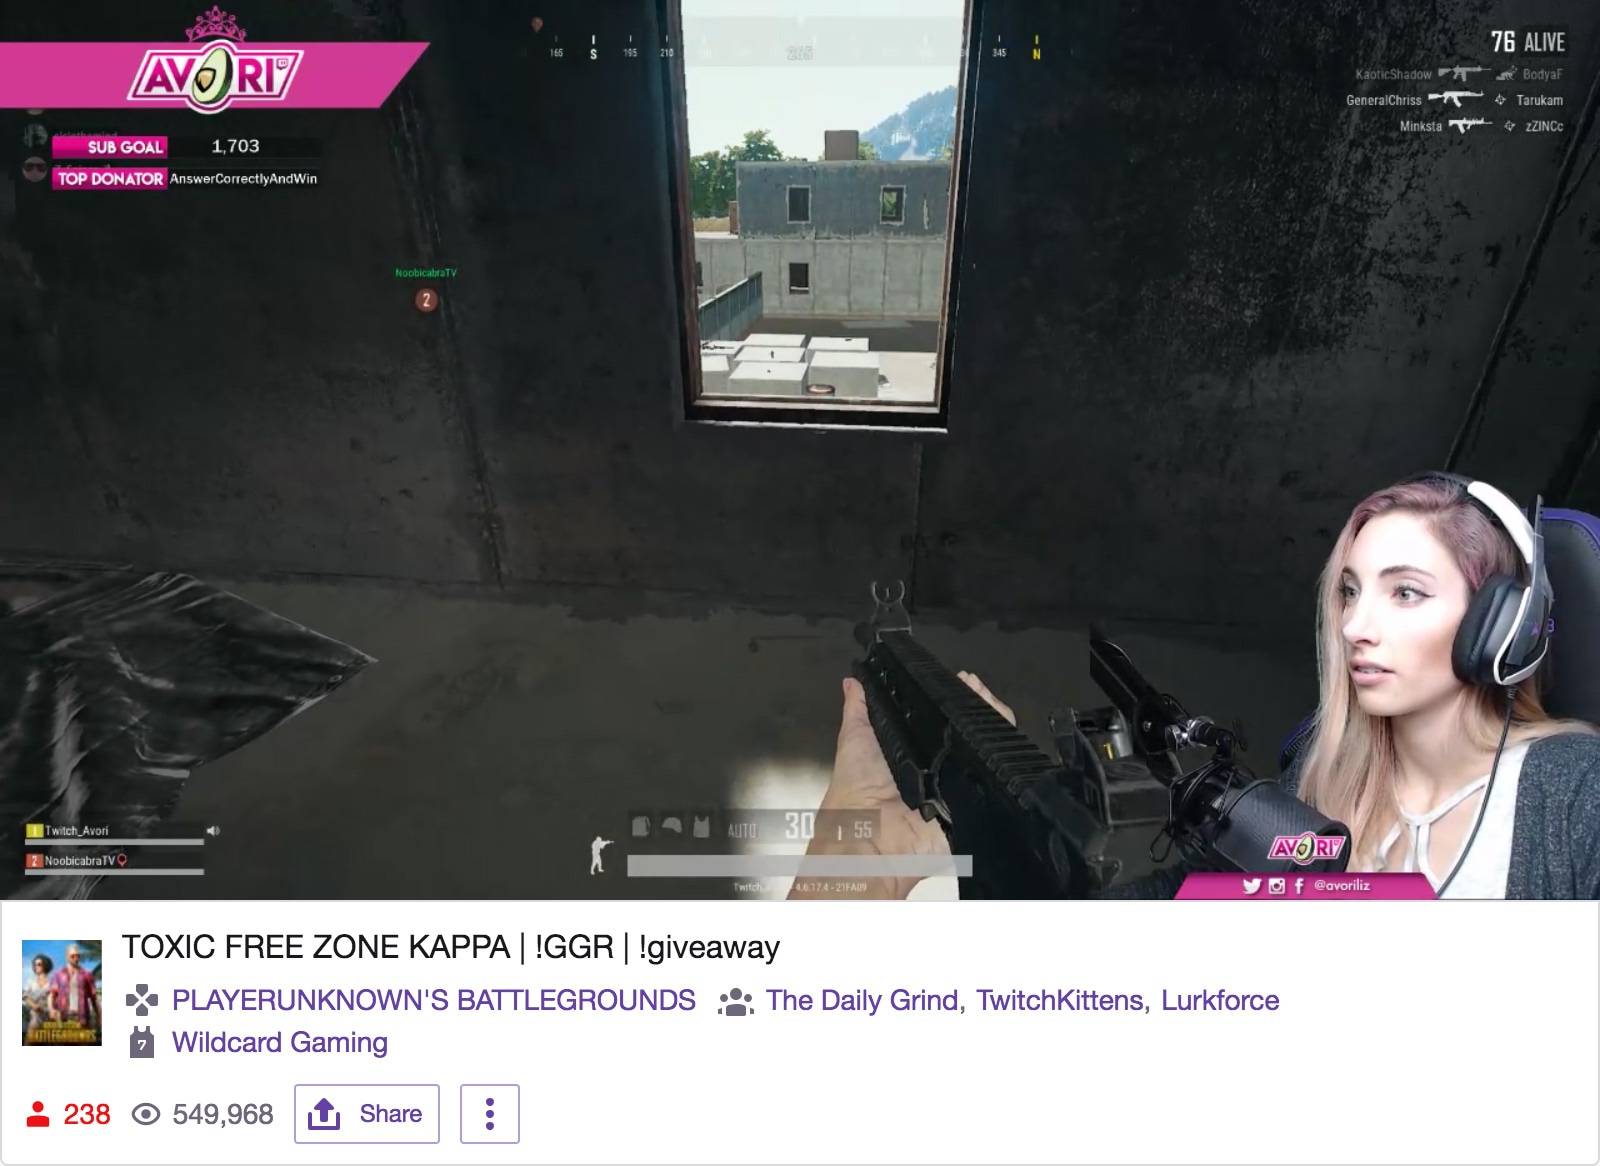 Footage from Twitch Kittens' stream on Twitch featuring a giveaway